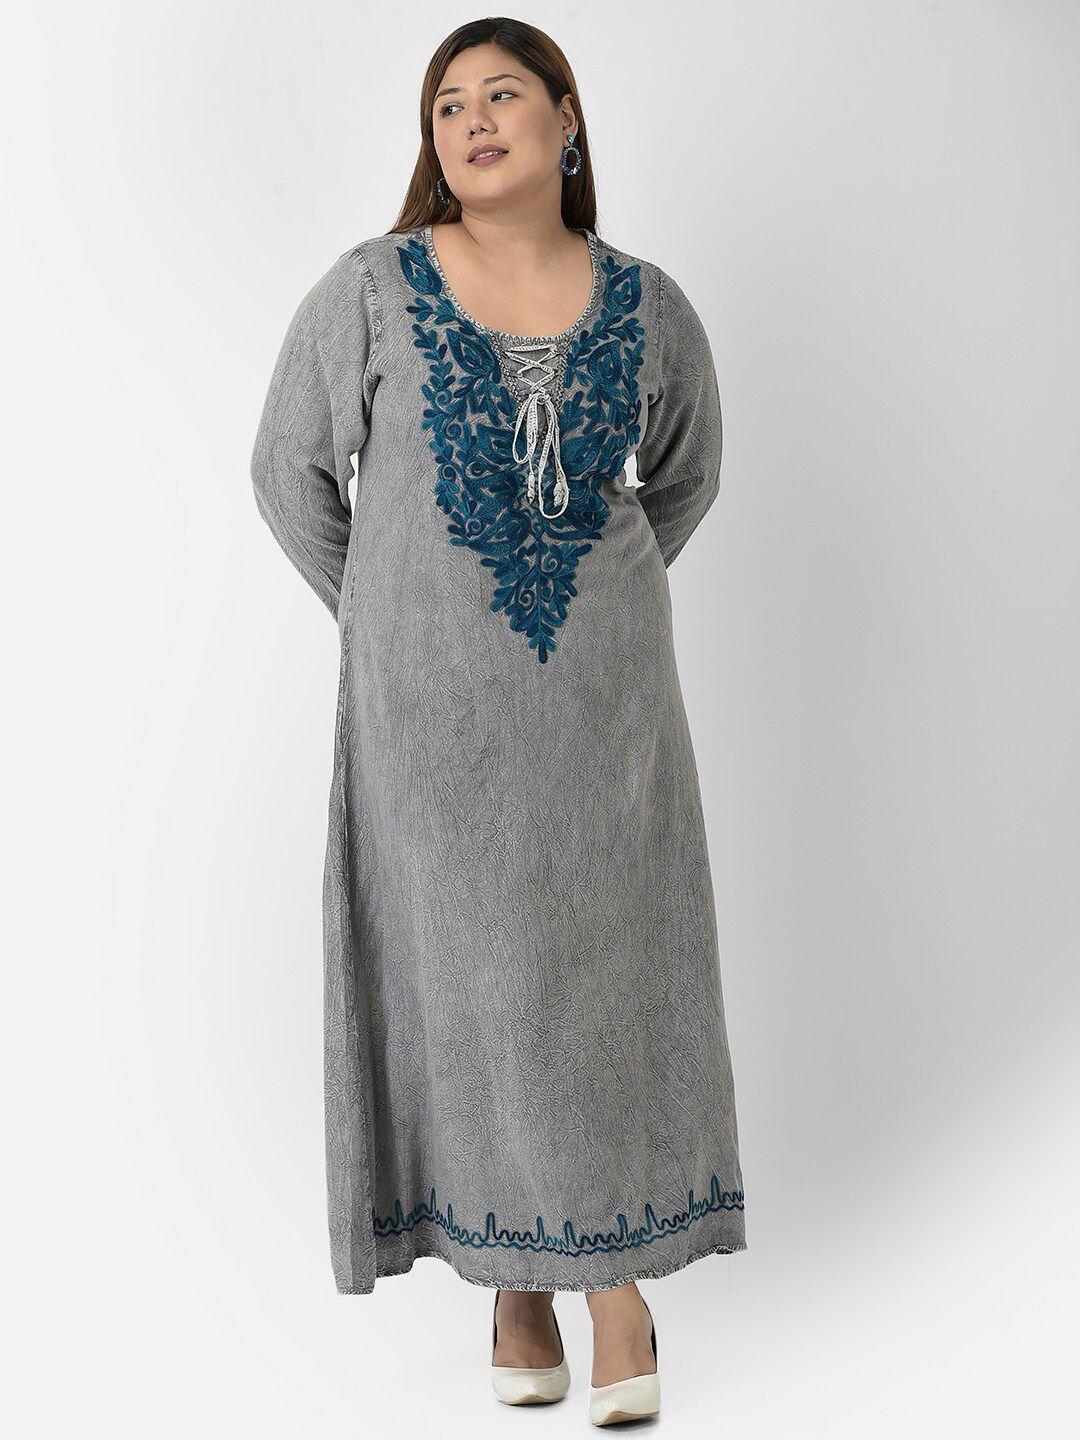 veldress women grey & blue floral embroidered maxi dress